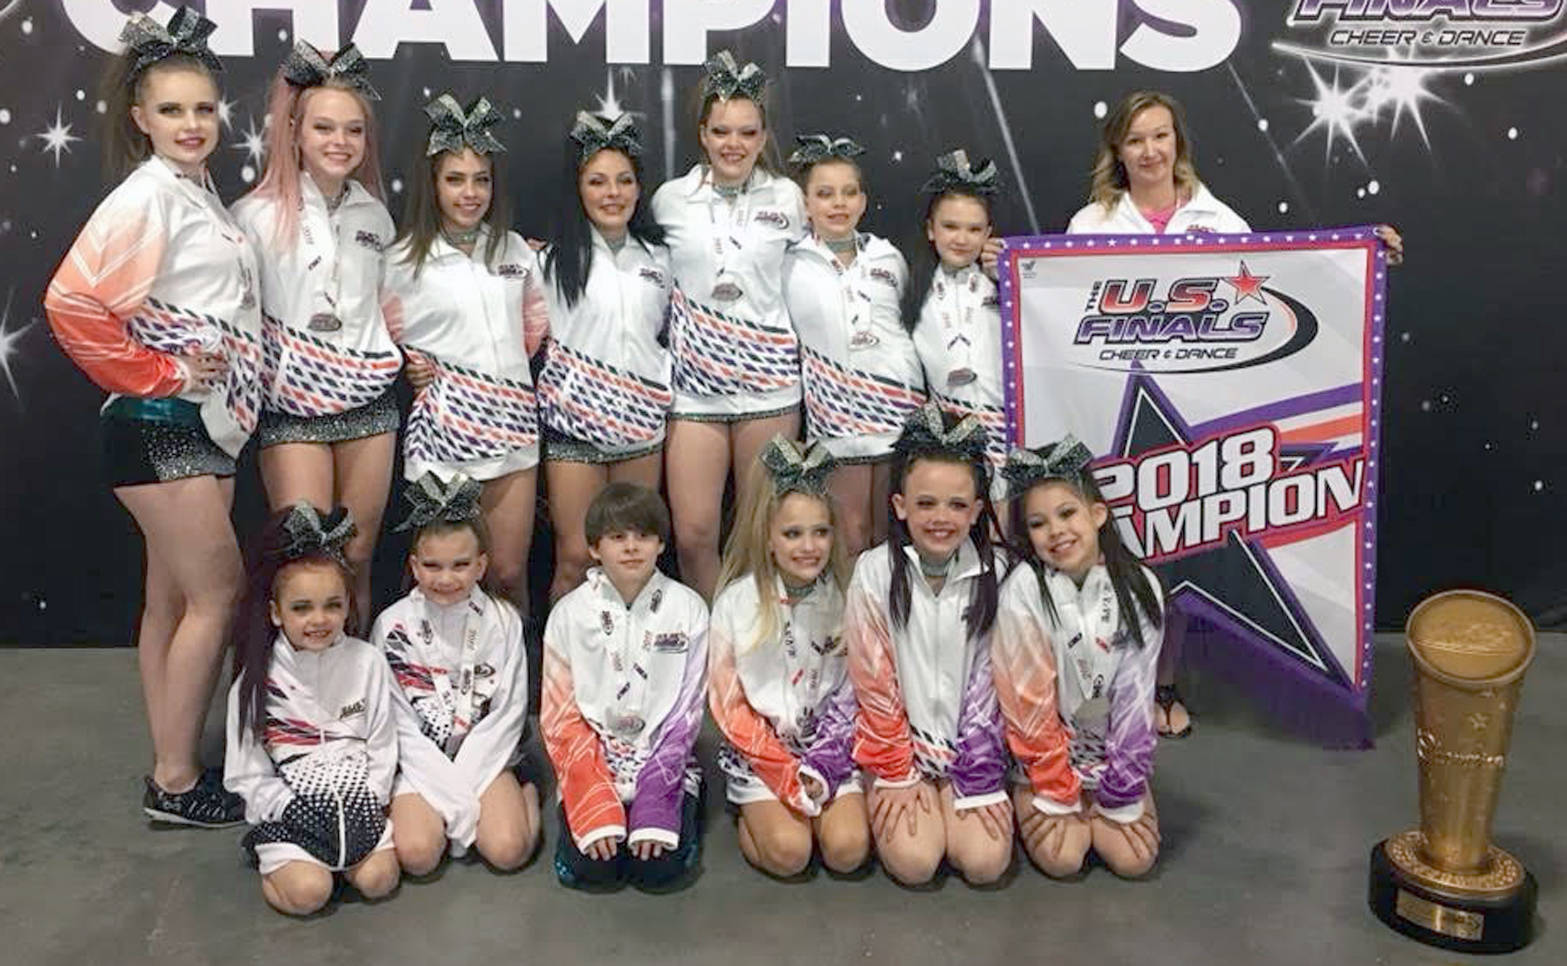 The All-Star Cheerleading Team from River City Cheer and Gymnastics poses after winning the U.S. Finals National Championships in Las Vegas on Sunday, May 13, 2018. From top left to right, Sierra Stoaks, Cali Holmes, Morgan Chase, Avery Hart, Cheyenne Friedersdorff, Destiney Friedersdorff, Sylvia McGraw and coach Cari Winger. From bottom left to right, Ayden Russell, Cara Graves, Jackson Anding, McKenzie Harden, Liberty Lasky, Delilah Roberts.